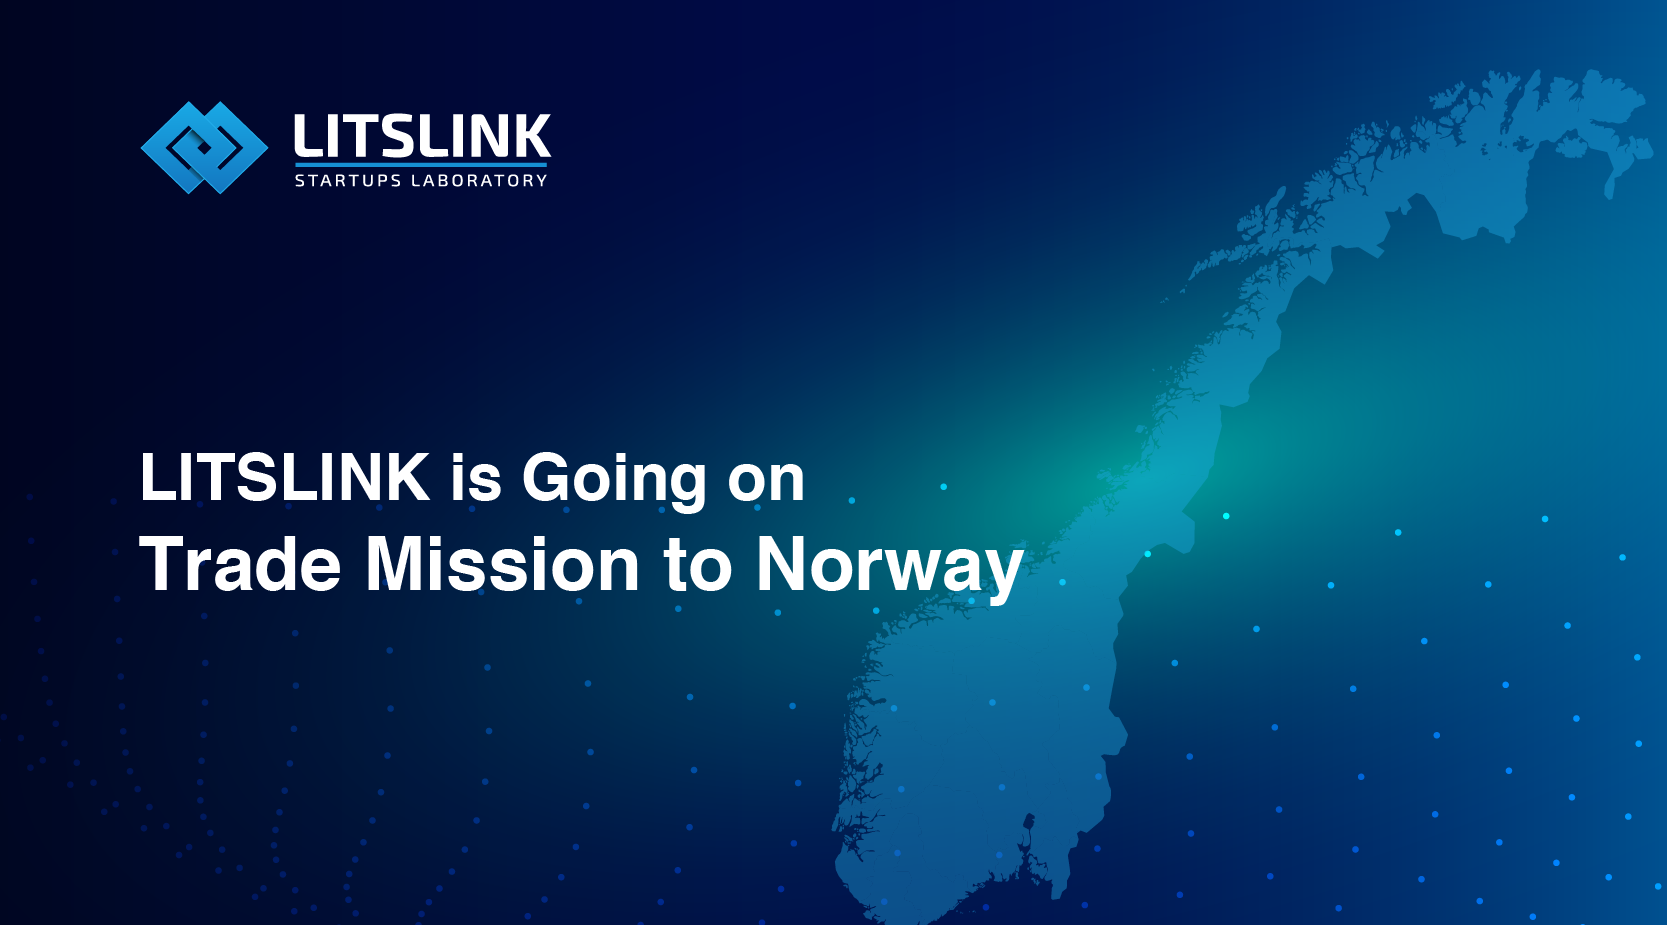 LITSLINK is Going on Trade Mission to Norway!